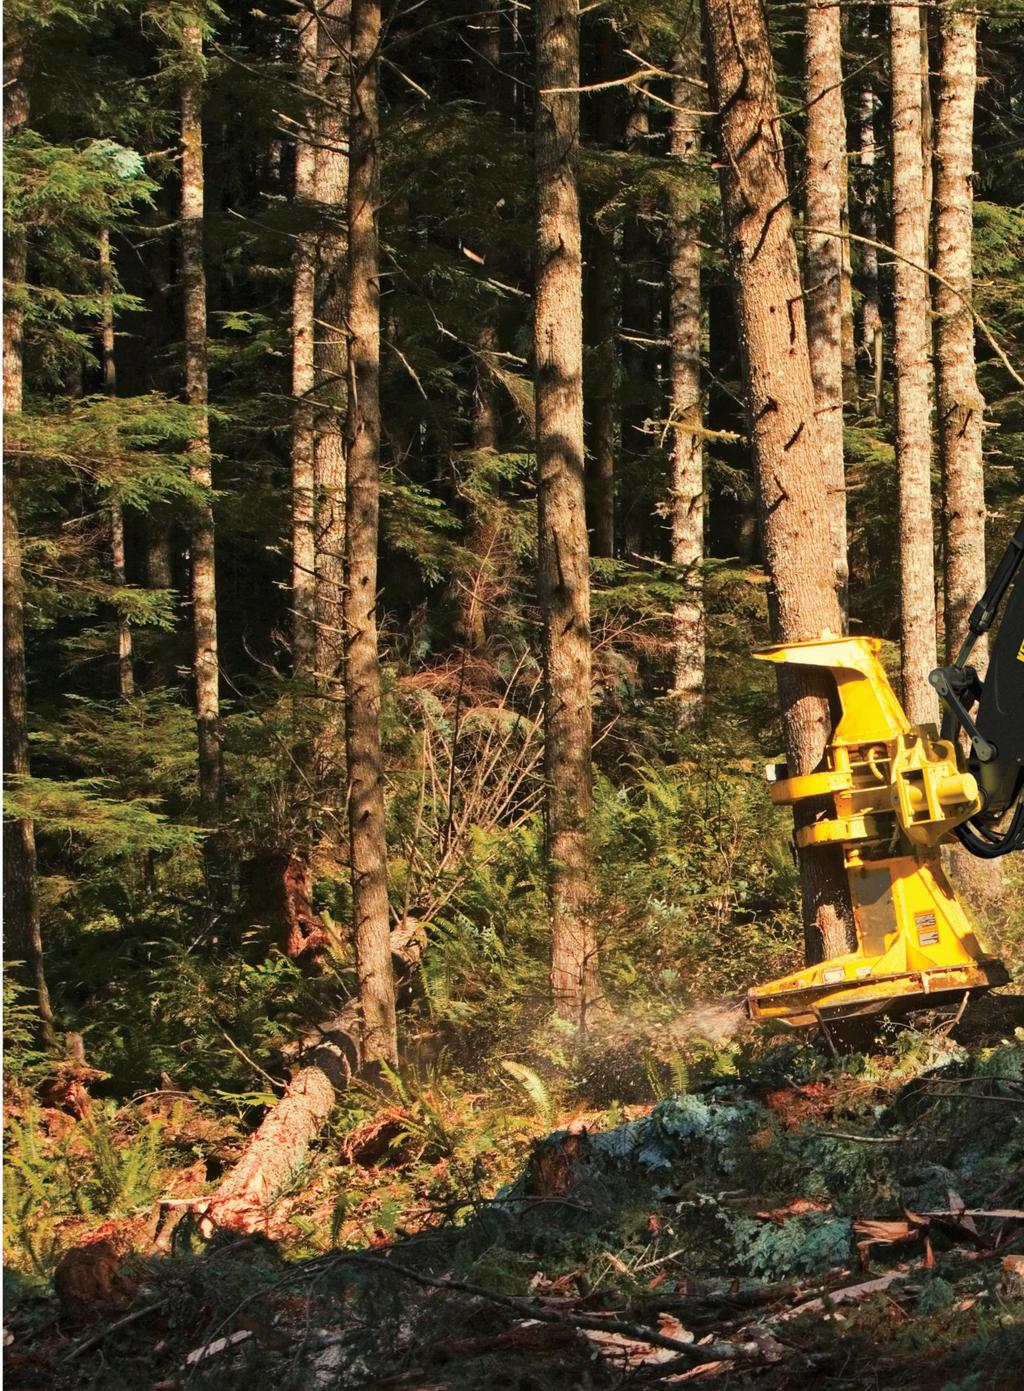 Tame the toughest woods. The worst of the woods brings out the best in a 900K-Series Feller Buncher. Large-displacement 9.